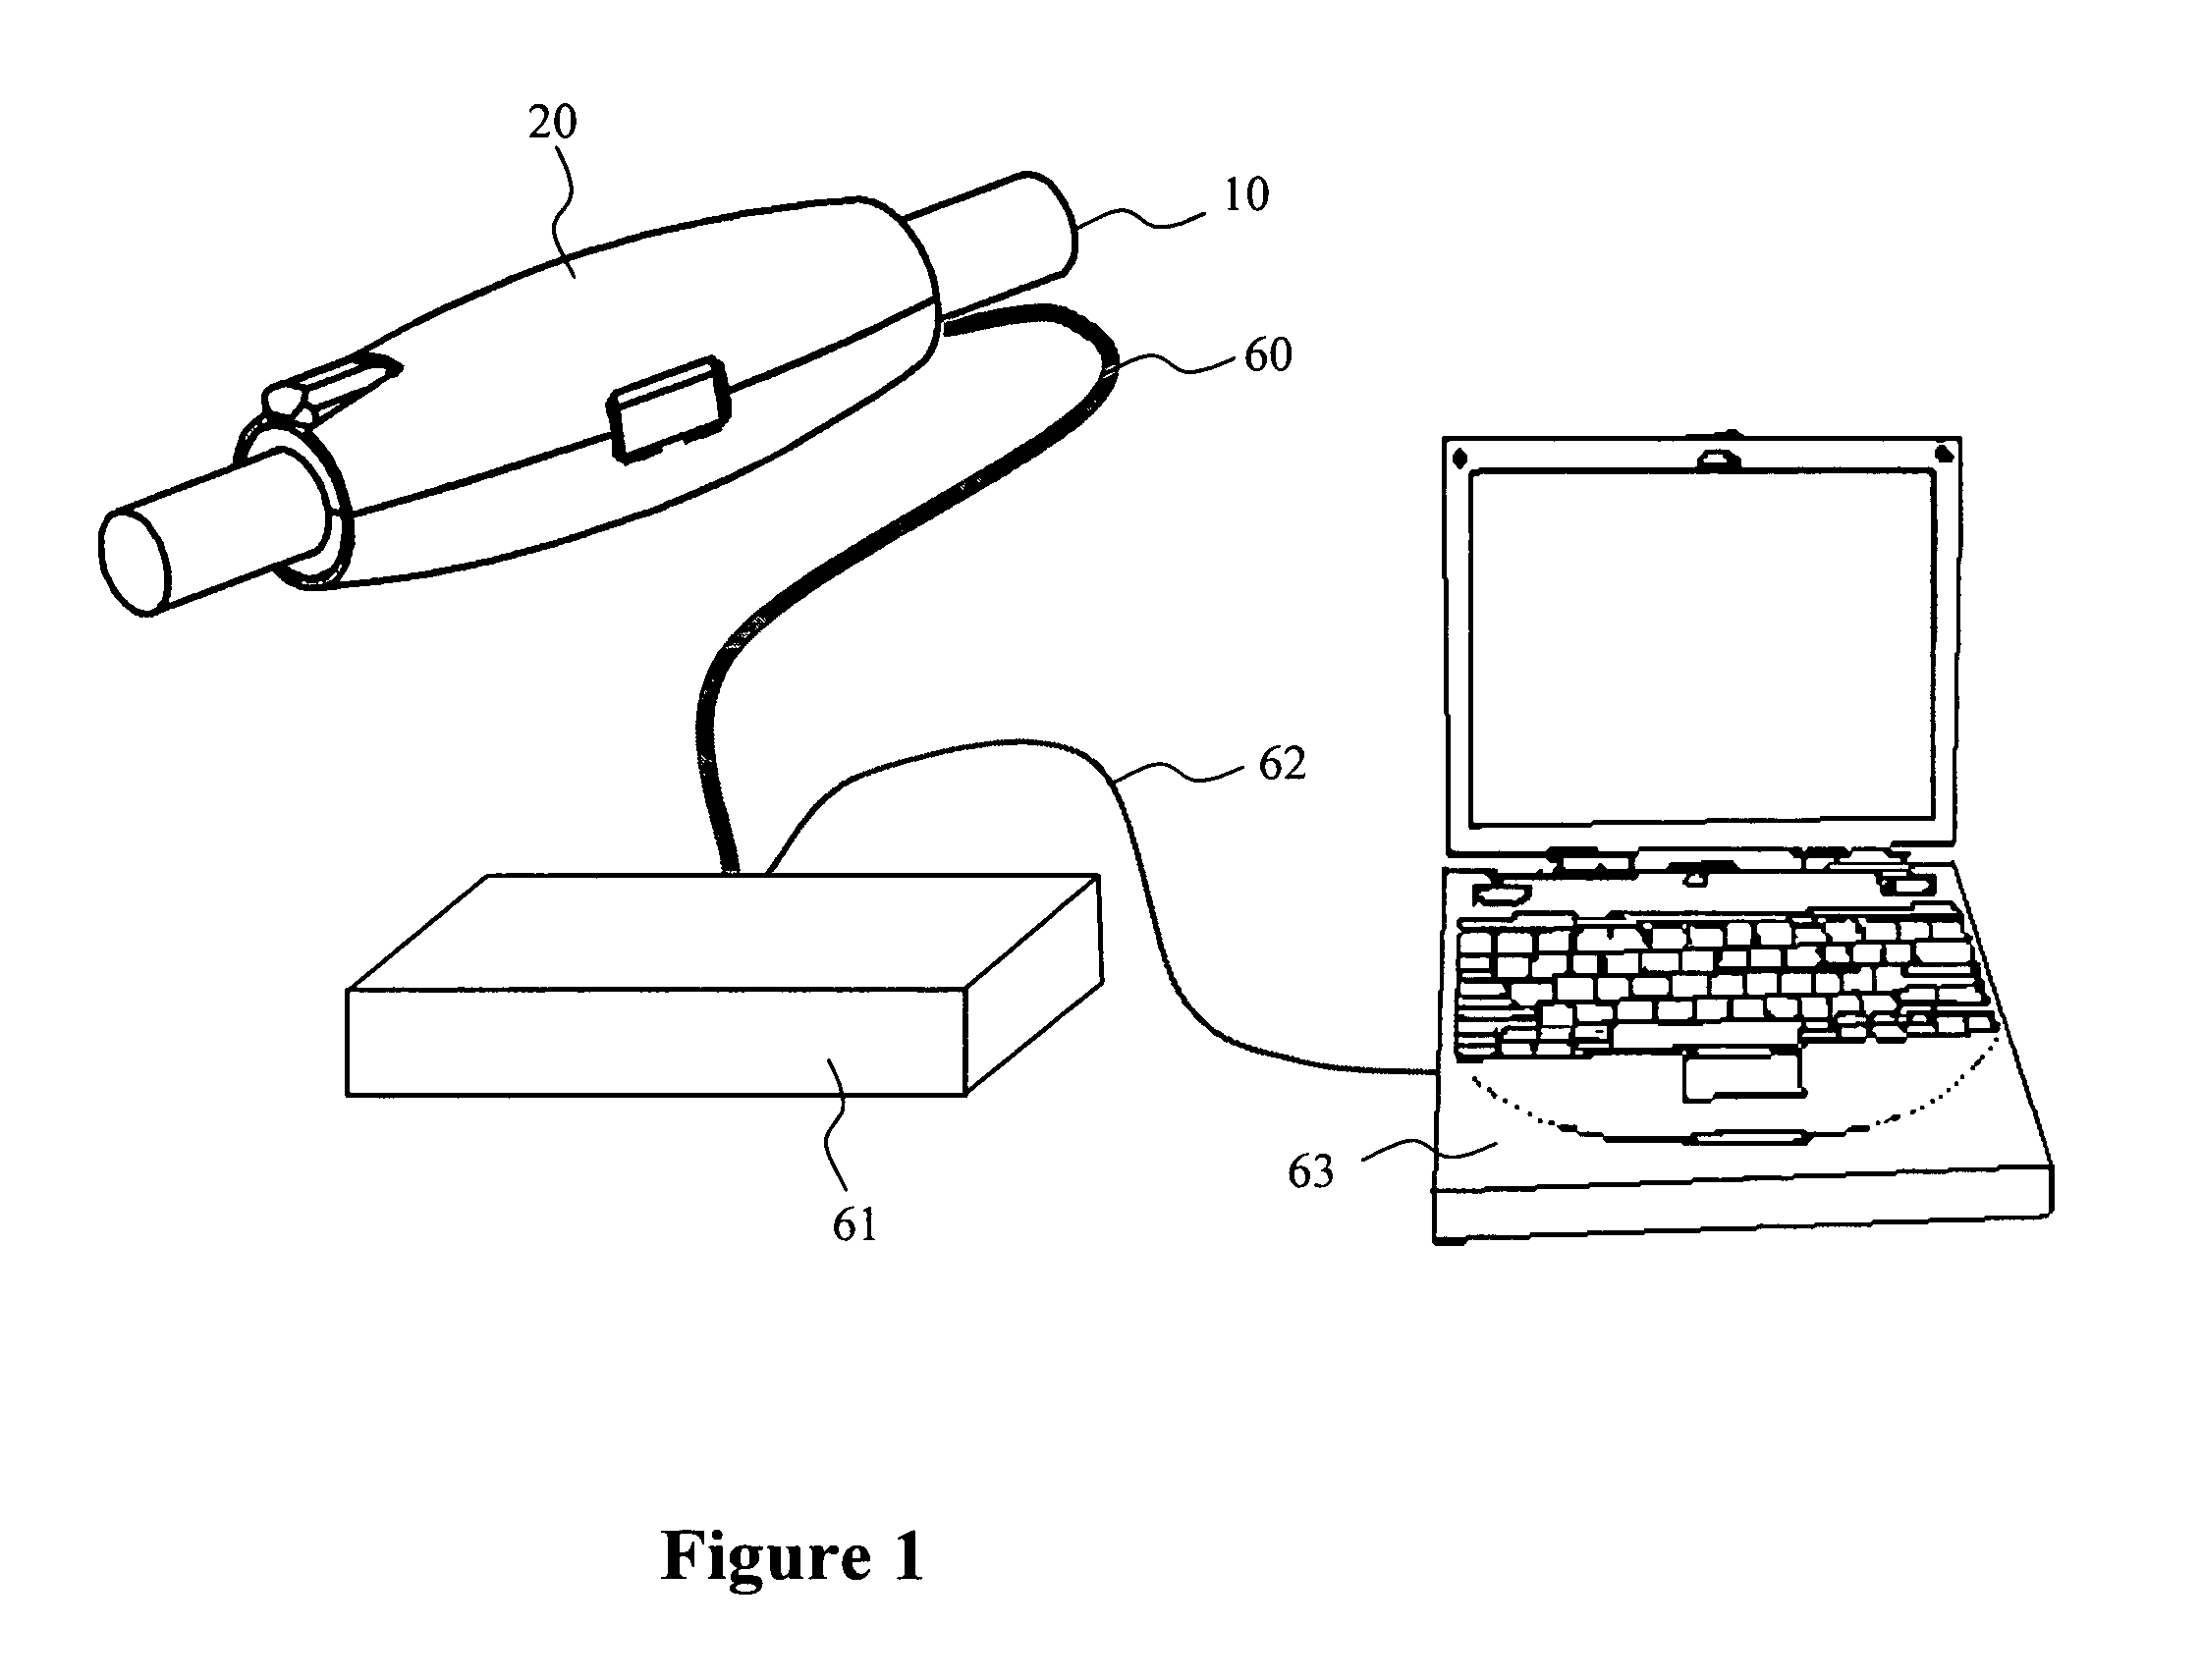 Colonoscope handgrip with force and torque monitor